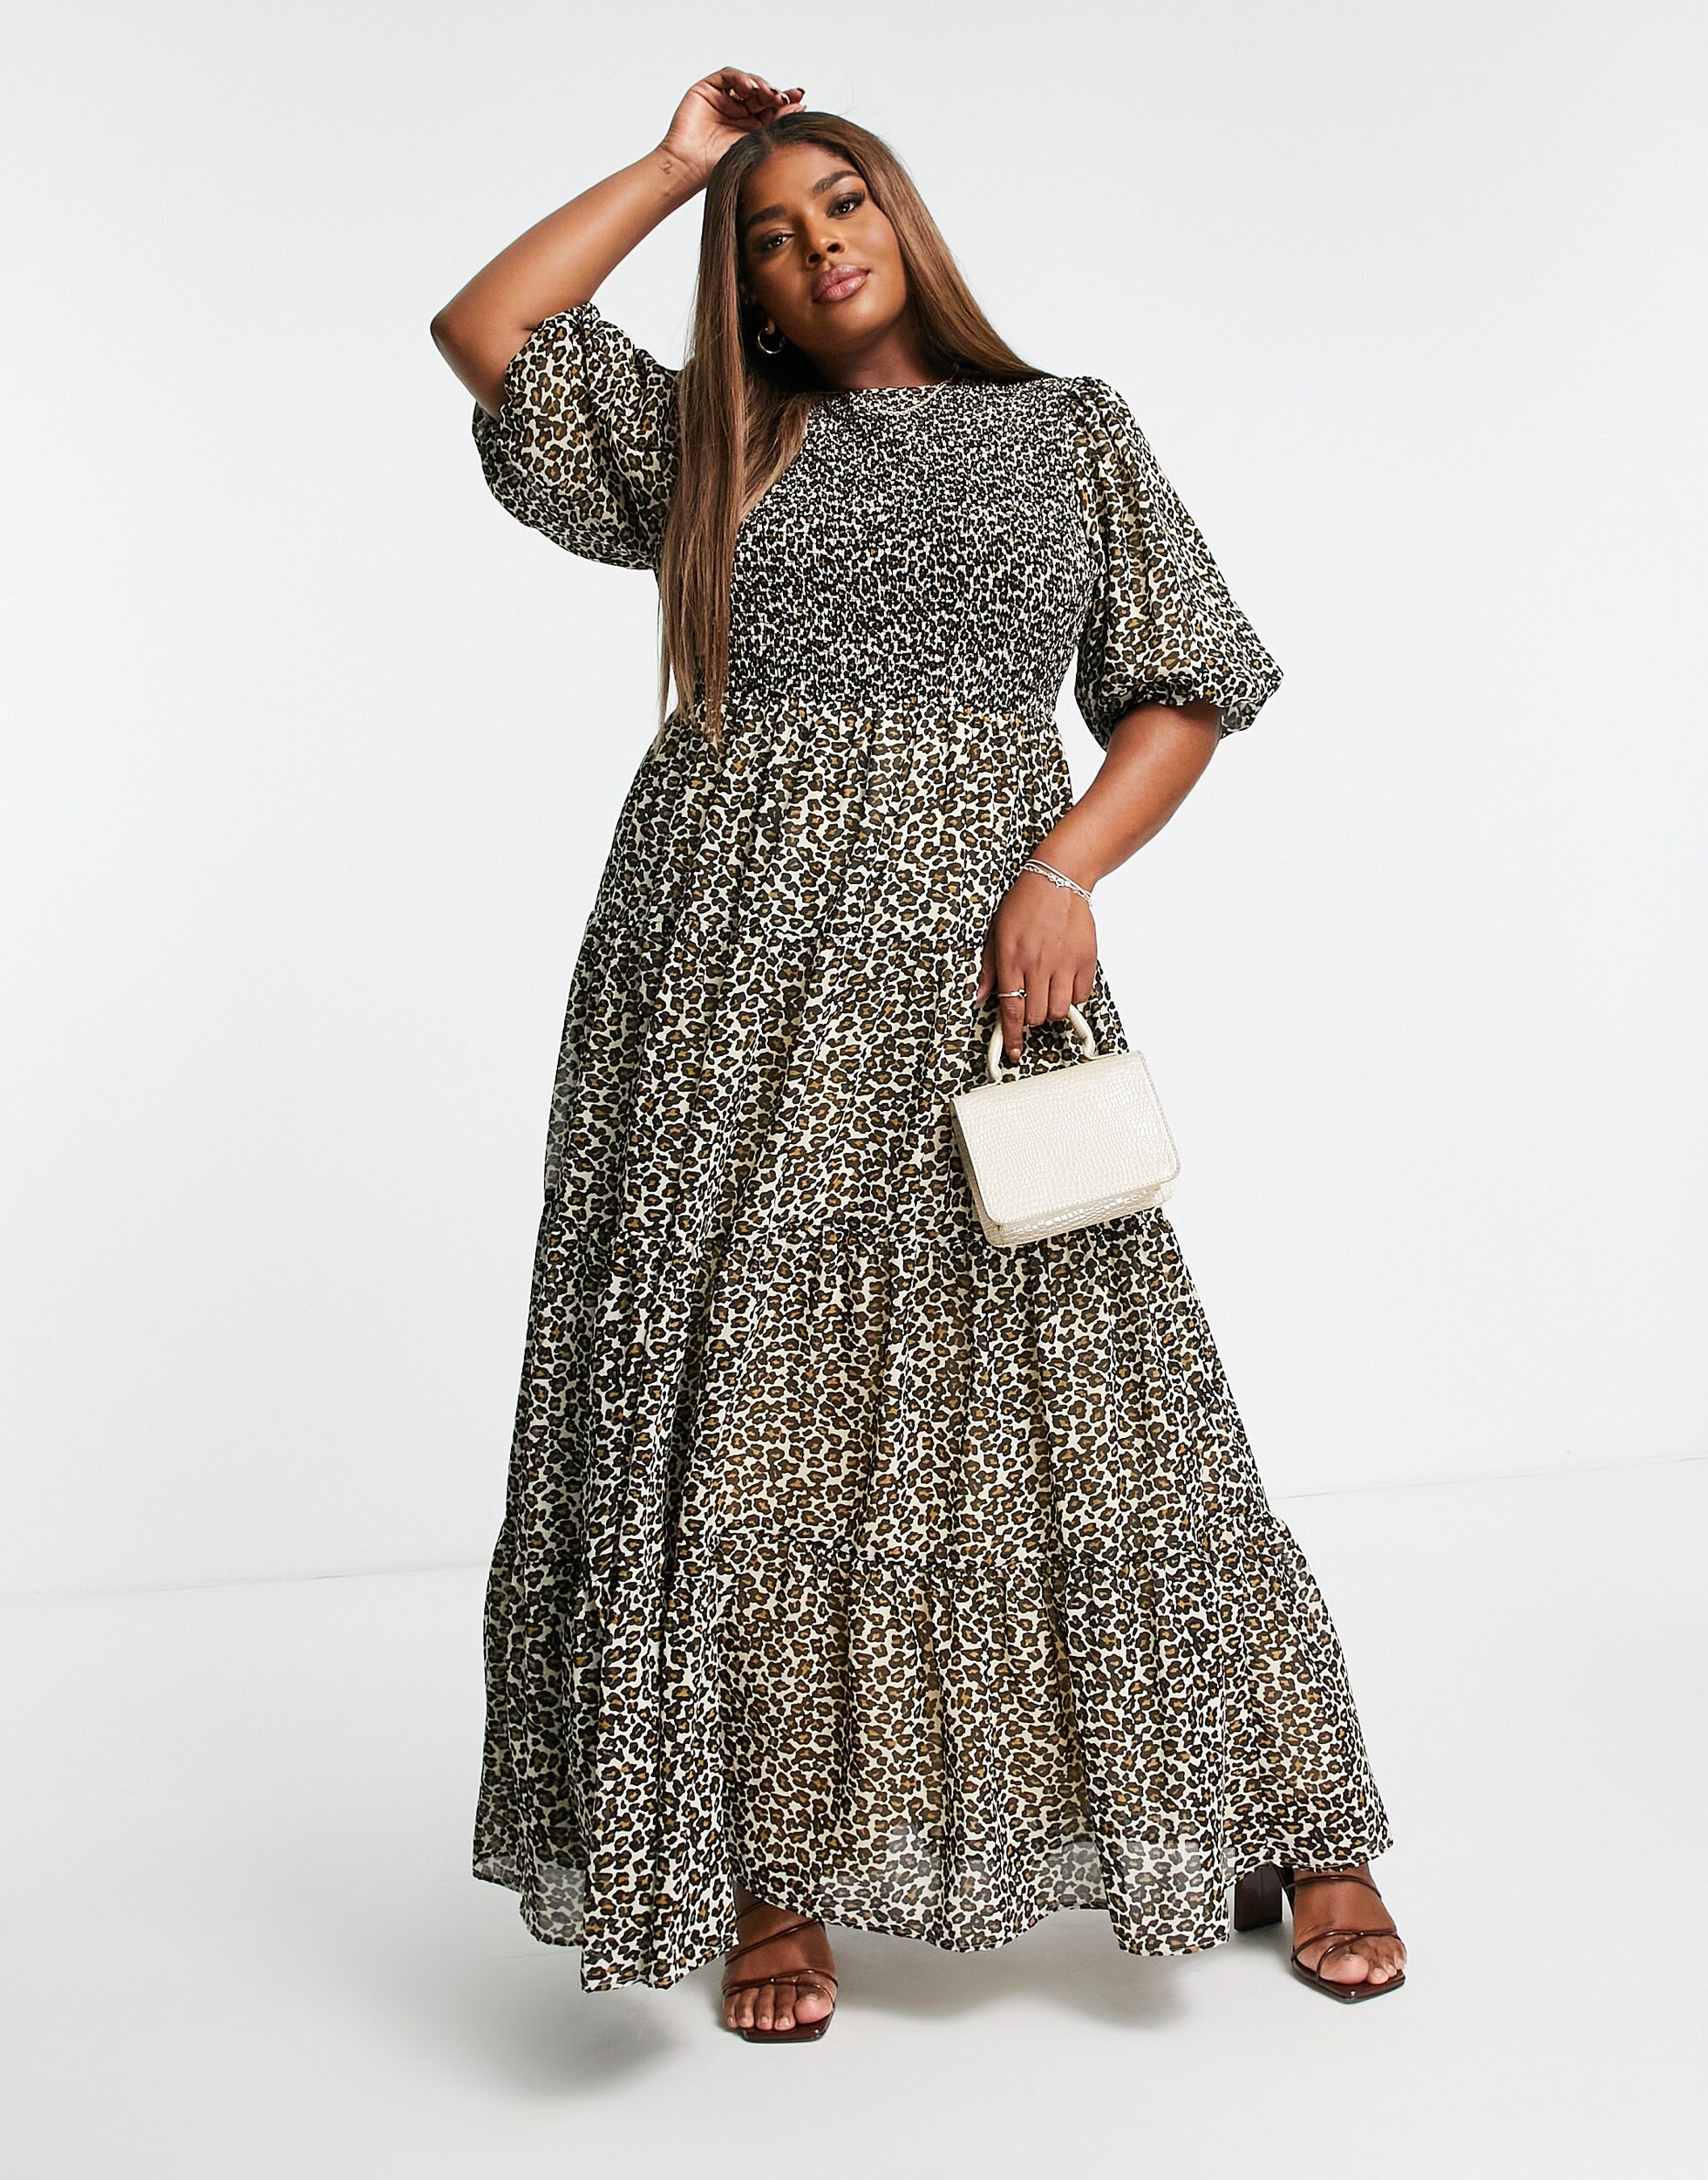 A picture of a model wearing a long ASOS DESIGN Curve leopard-print smock dress with a white purse. | ASOS Style Feed